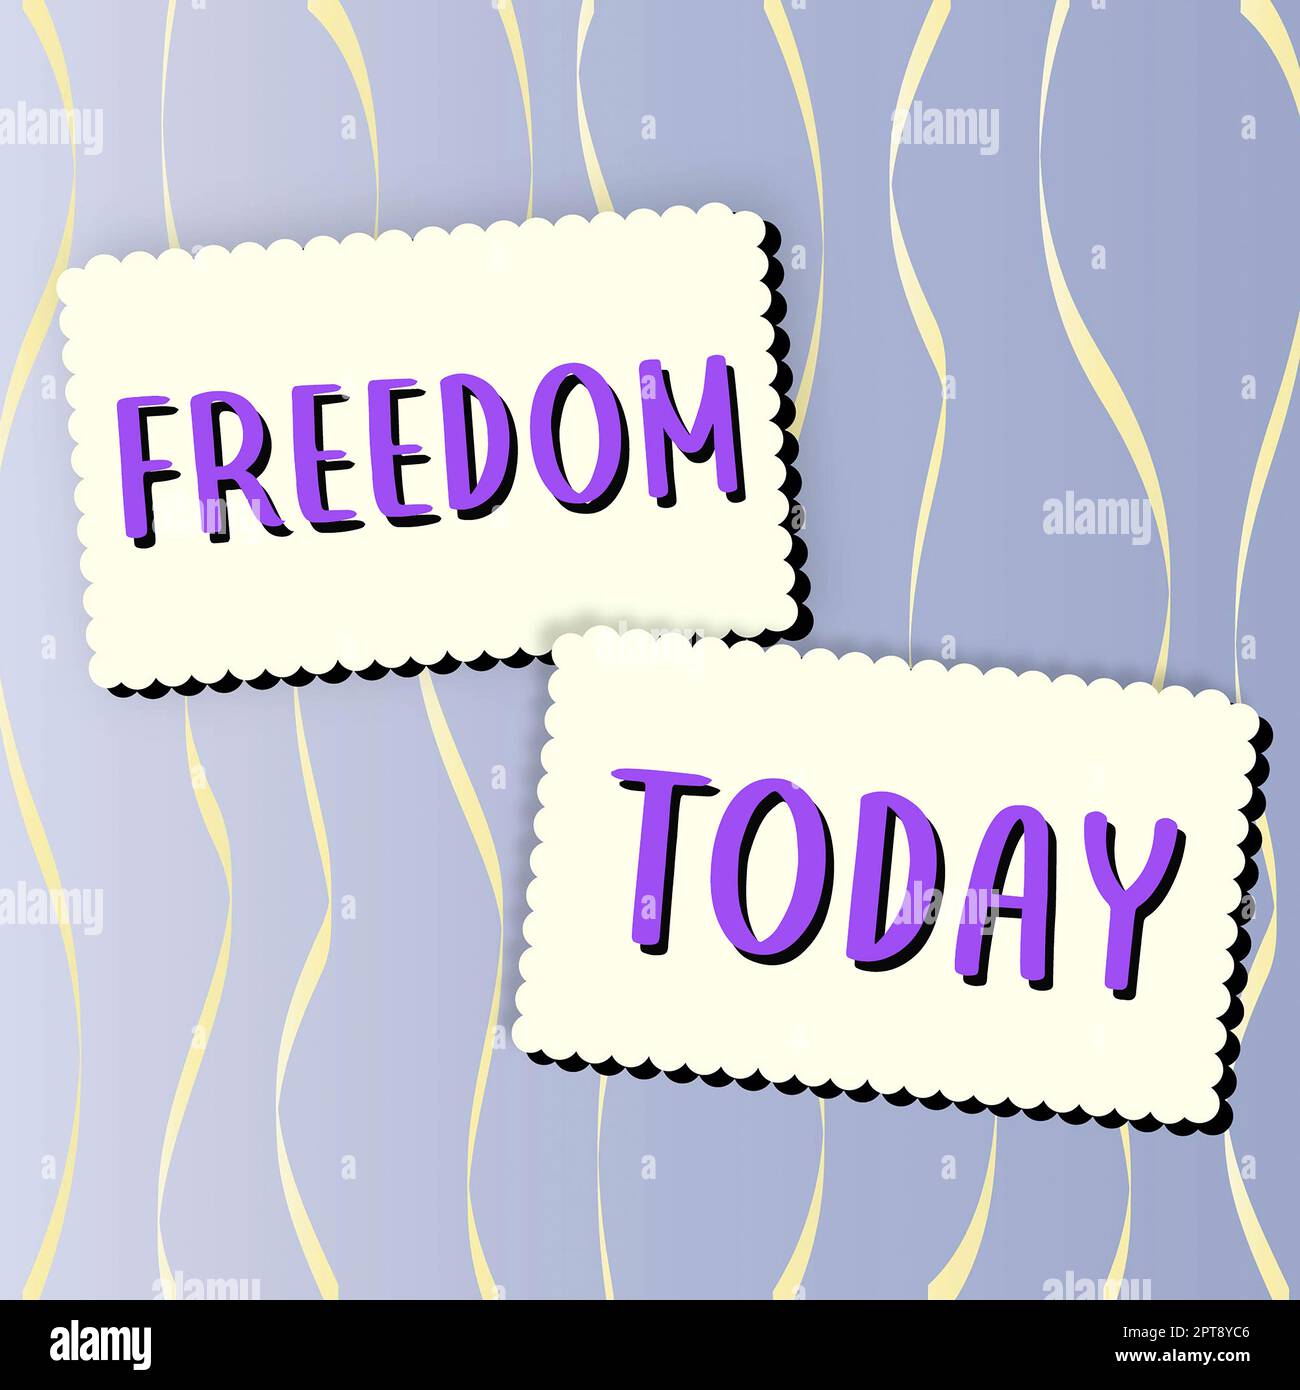 Inspiration showing sign Freedom, Internet Concept power or right to act speak or think as one wants without hindrance Colleagues Conencting Two Piece Stock Photo